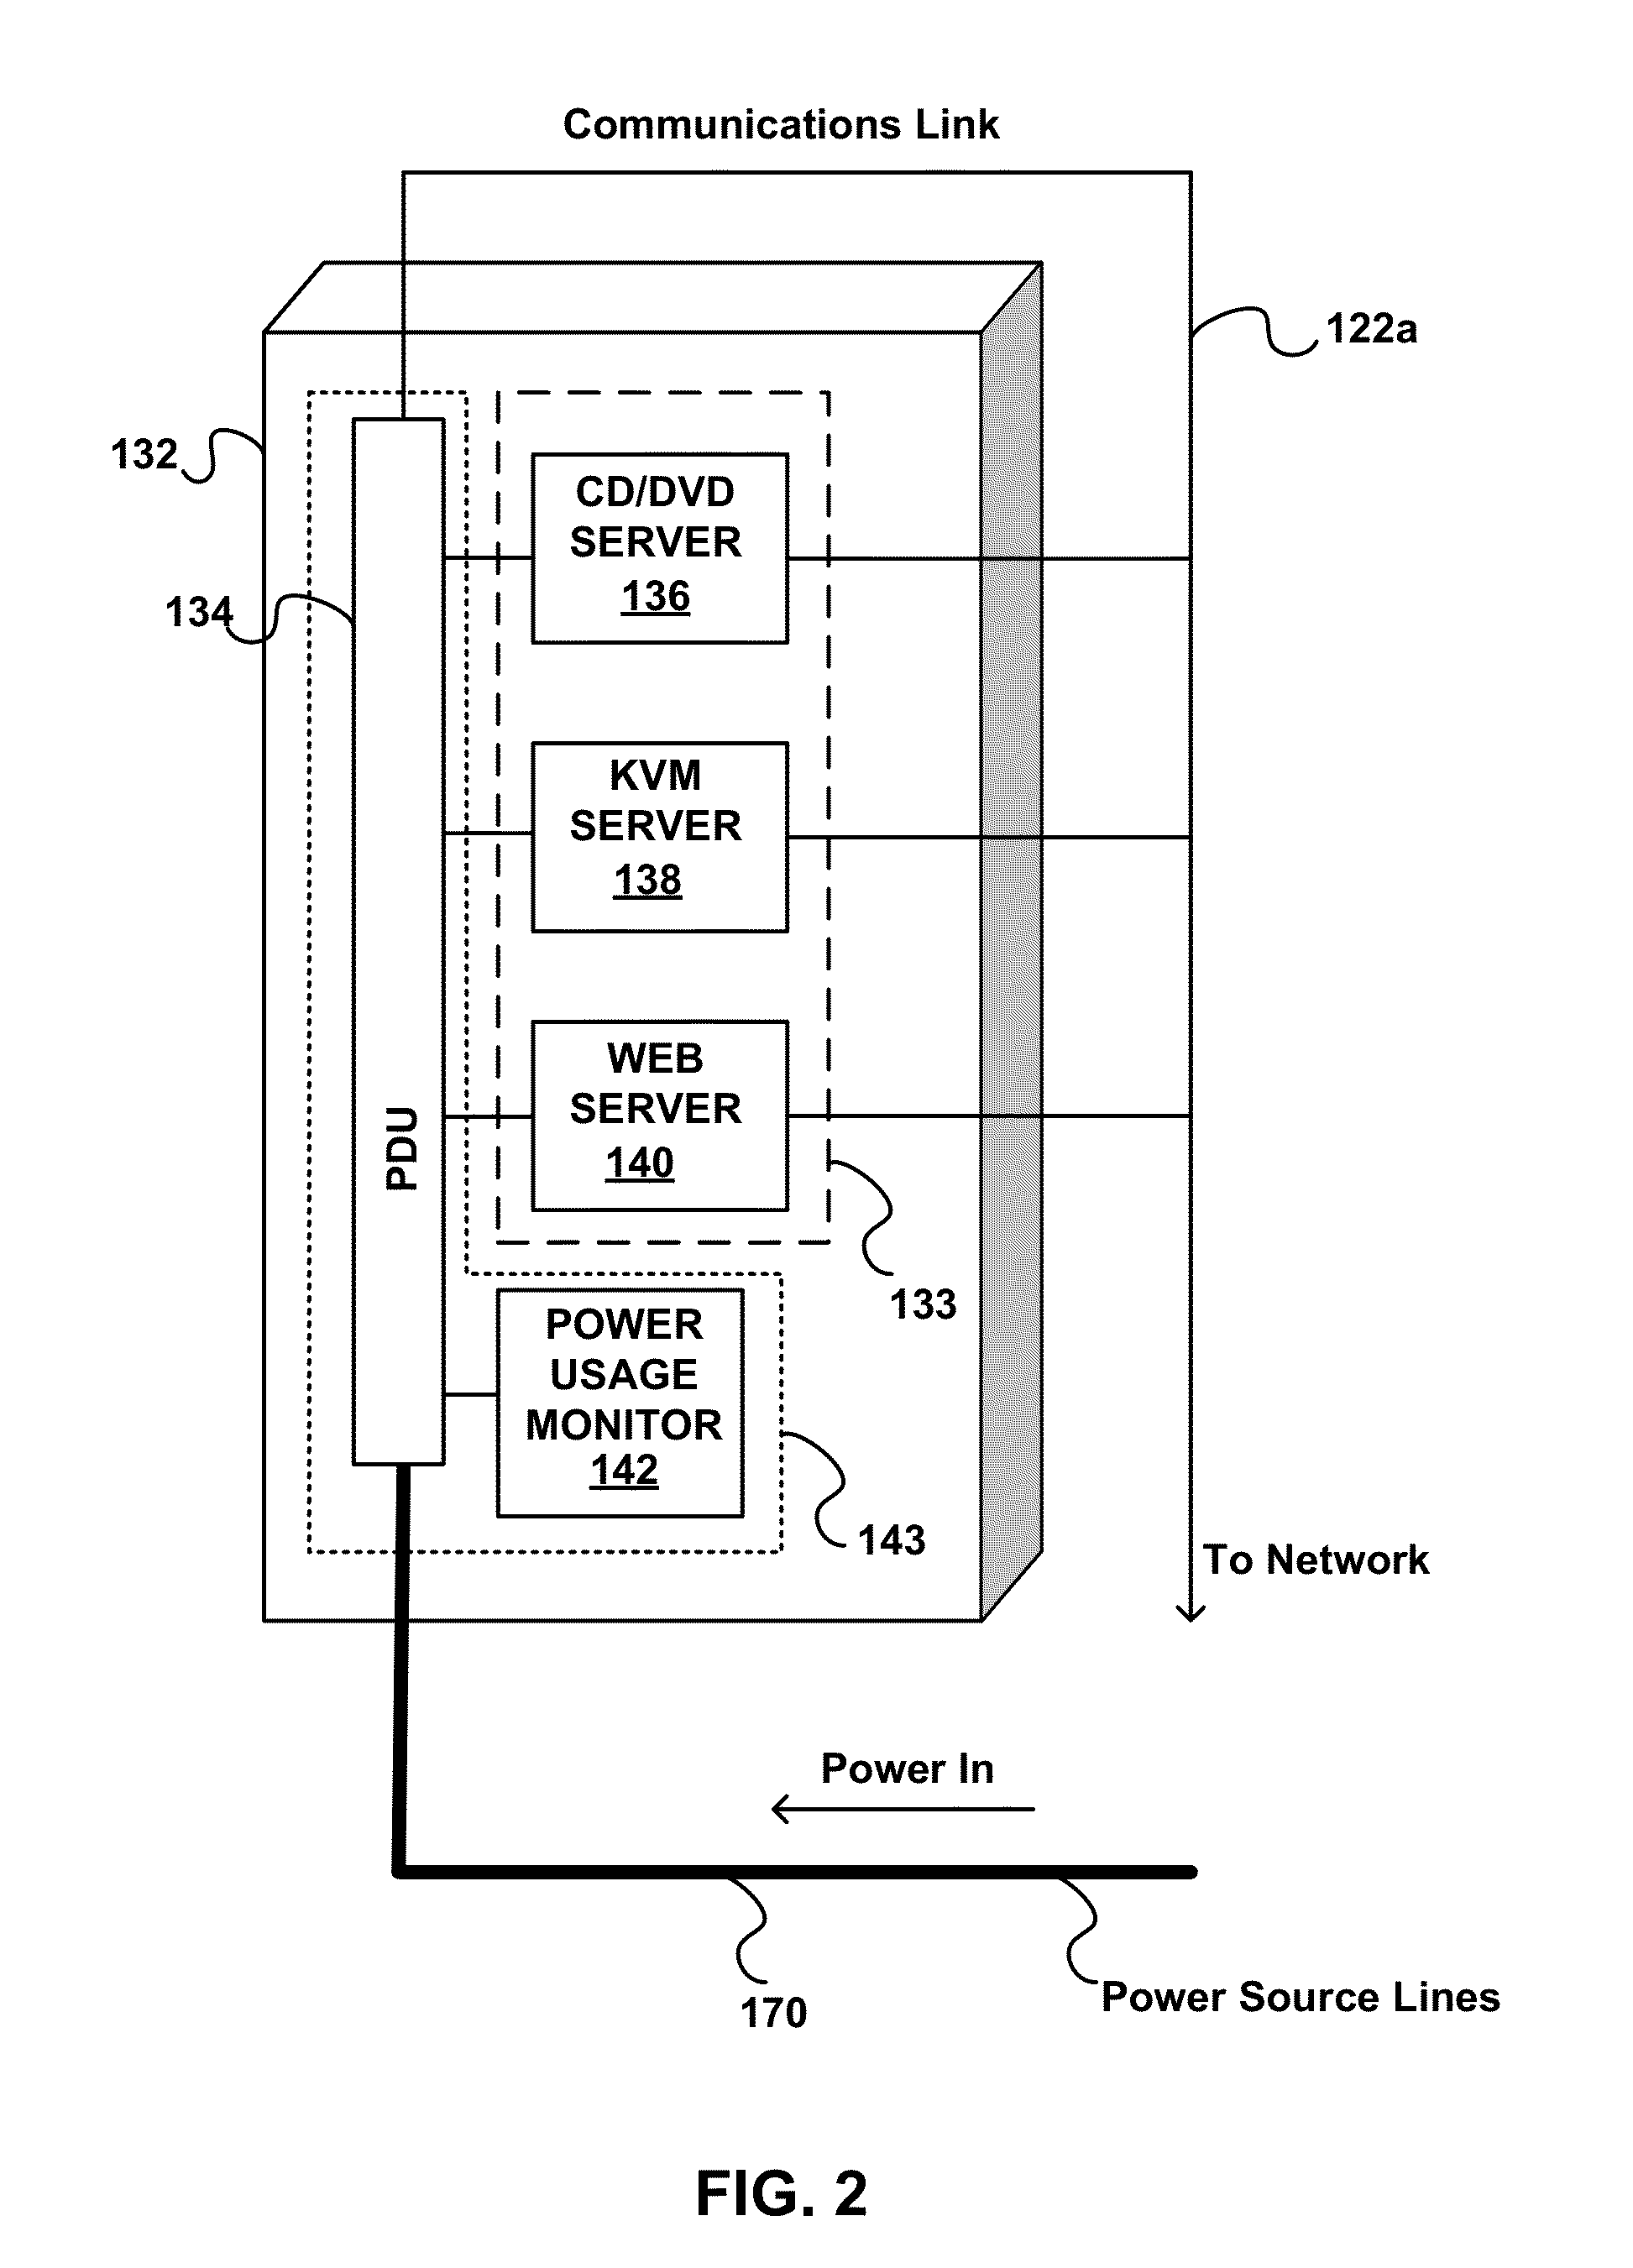 System and method for remotely managing electric power usage of target computers